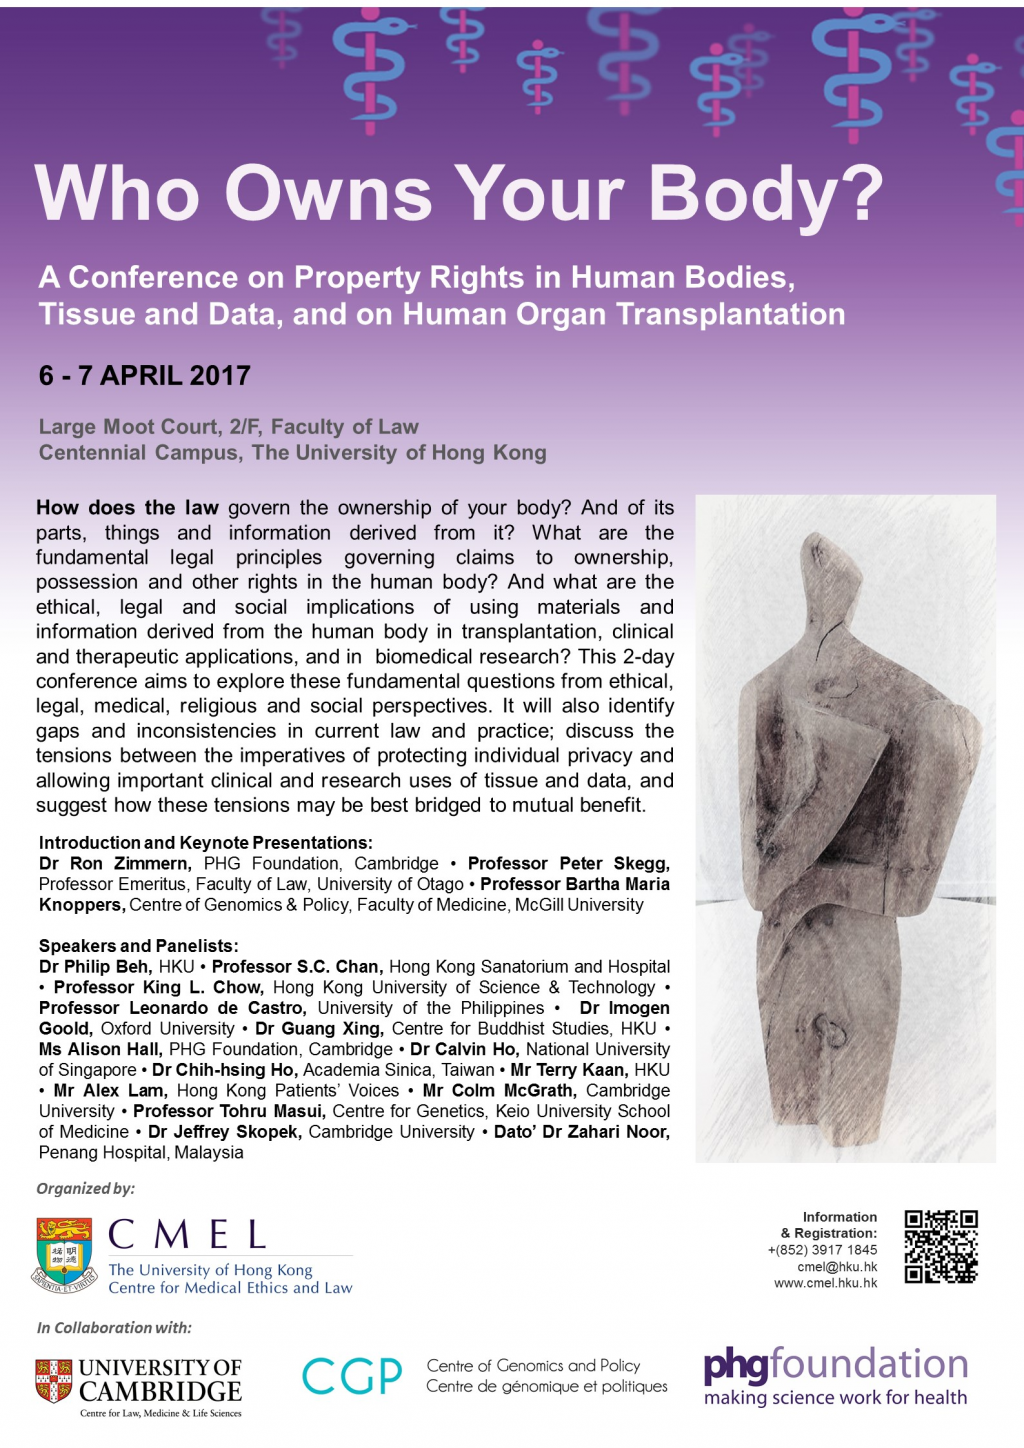 'Who Owns Your Body?' on 6 & 7 April 2017